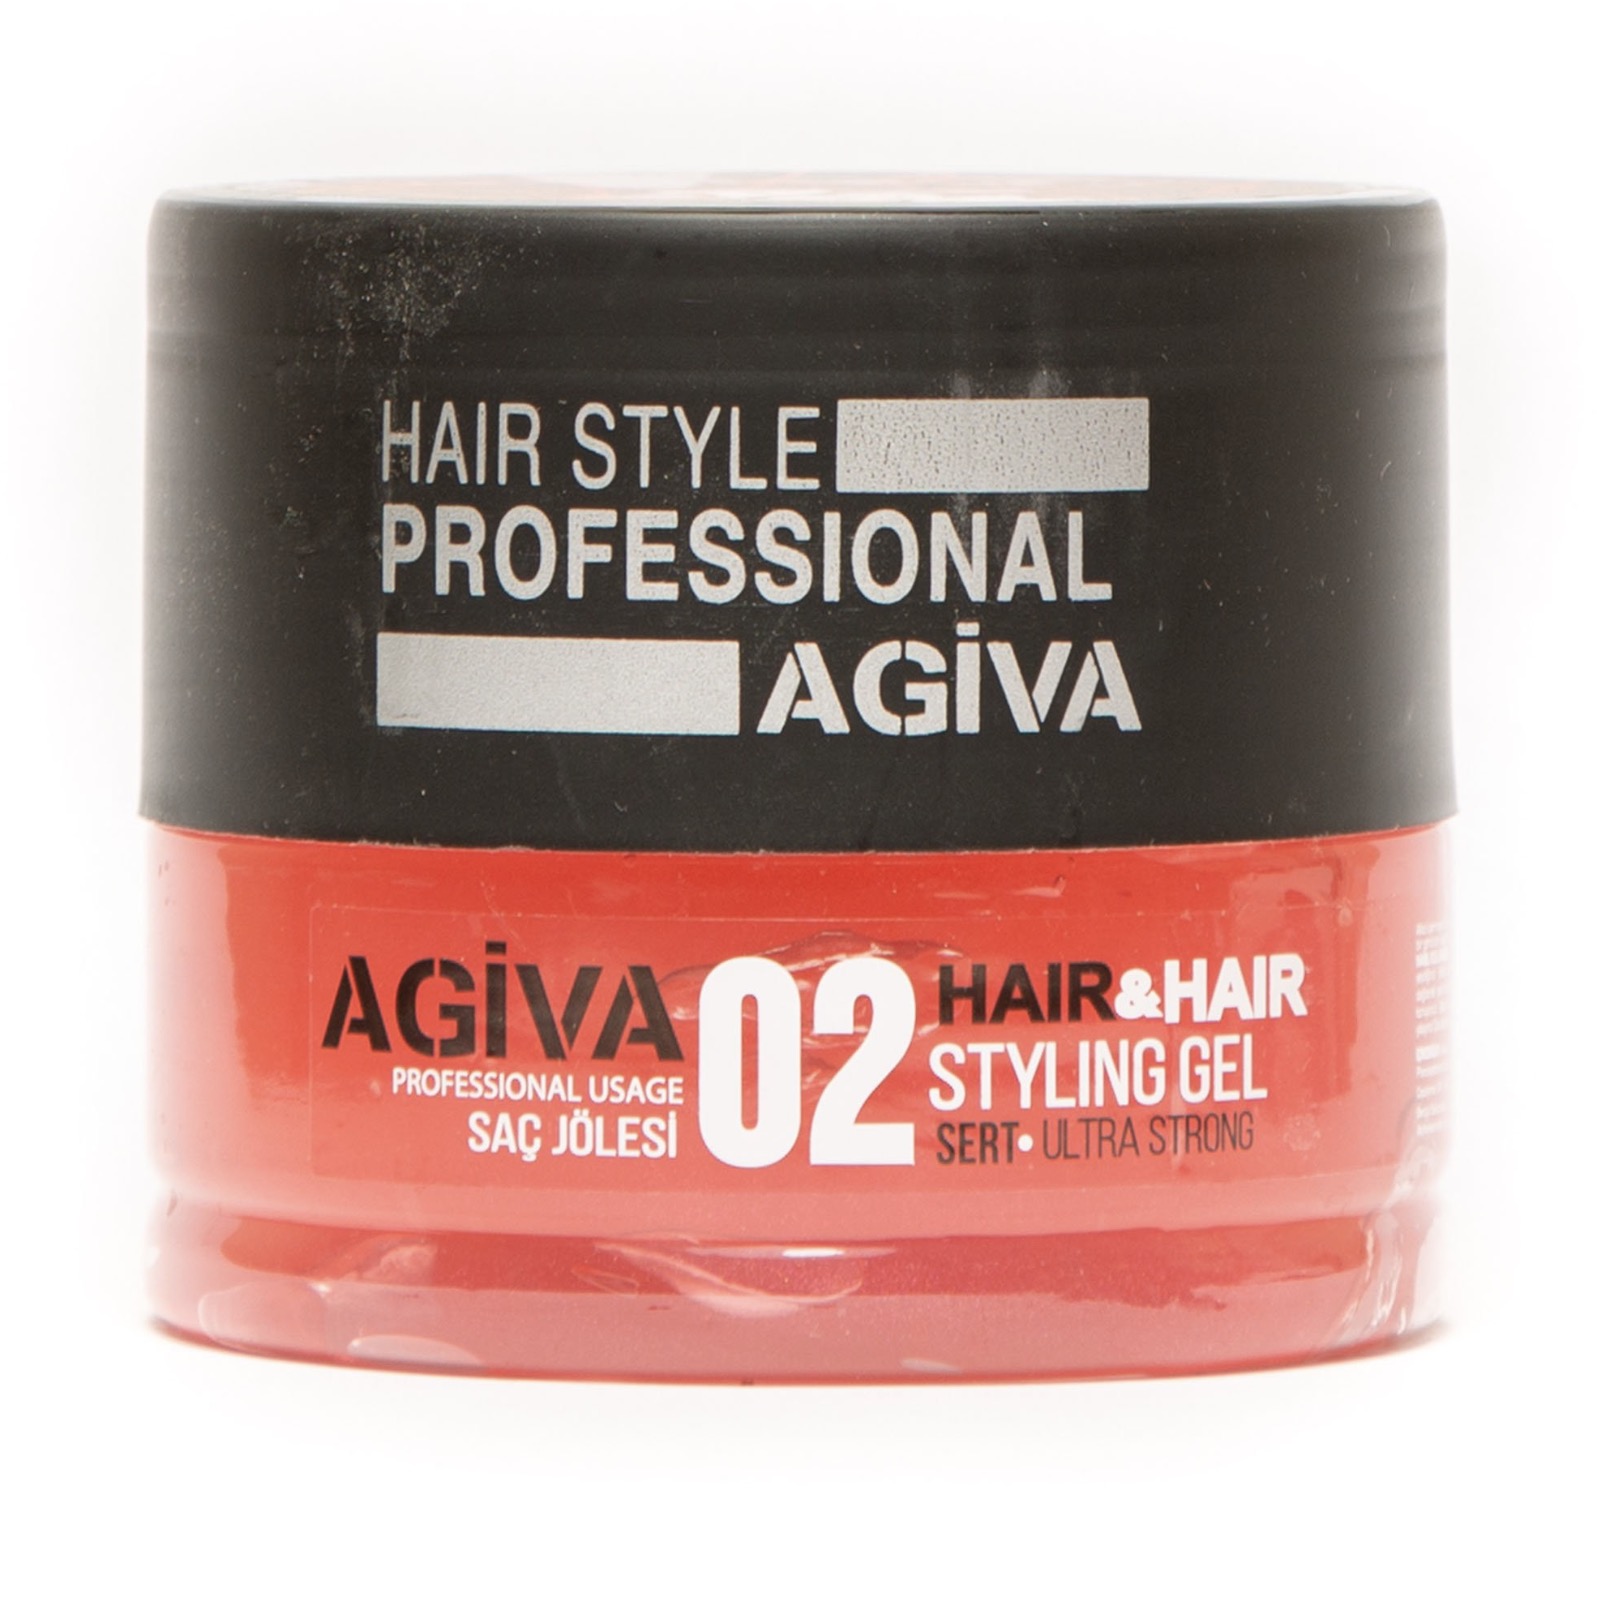 AGIVA Hair Styling Gel 02 Wet Look Ultra Strong Hold 700 ml